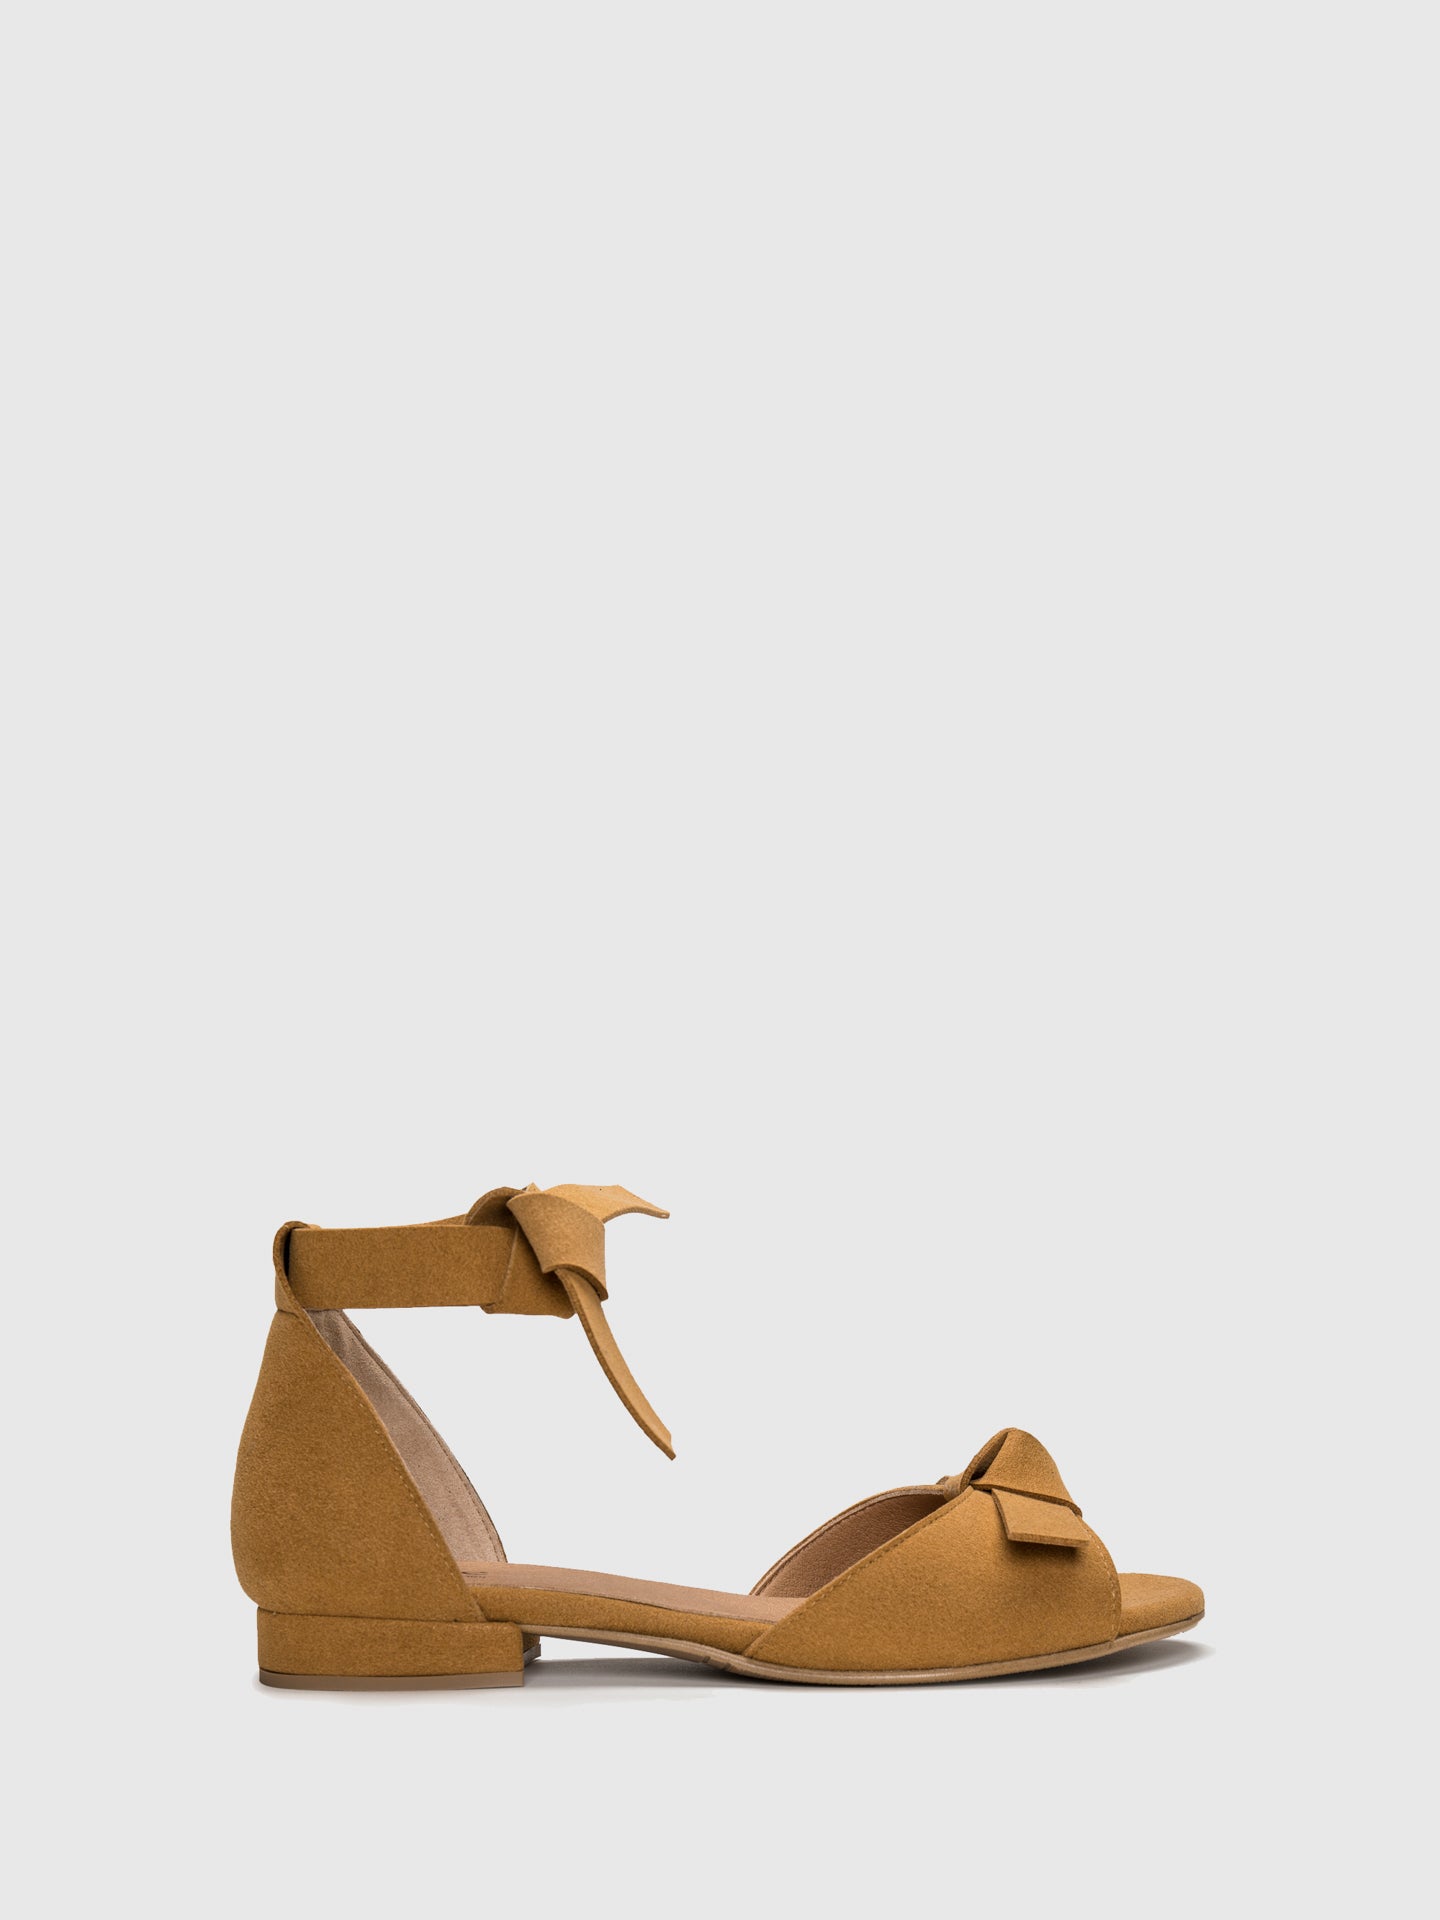 NAE Vegan Shoes Yellow Lace-up Sandals